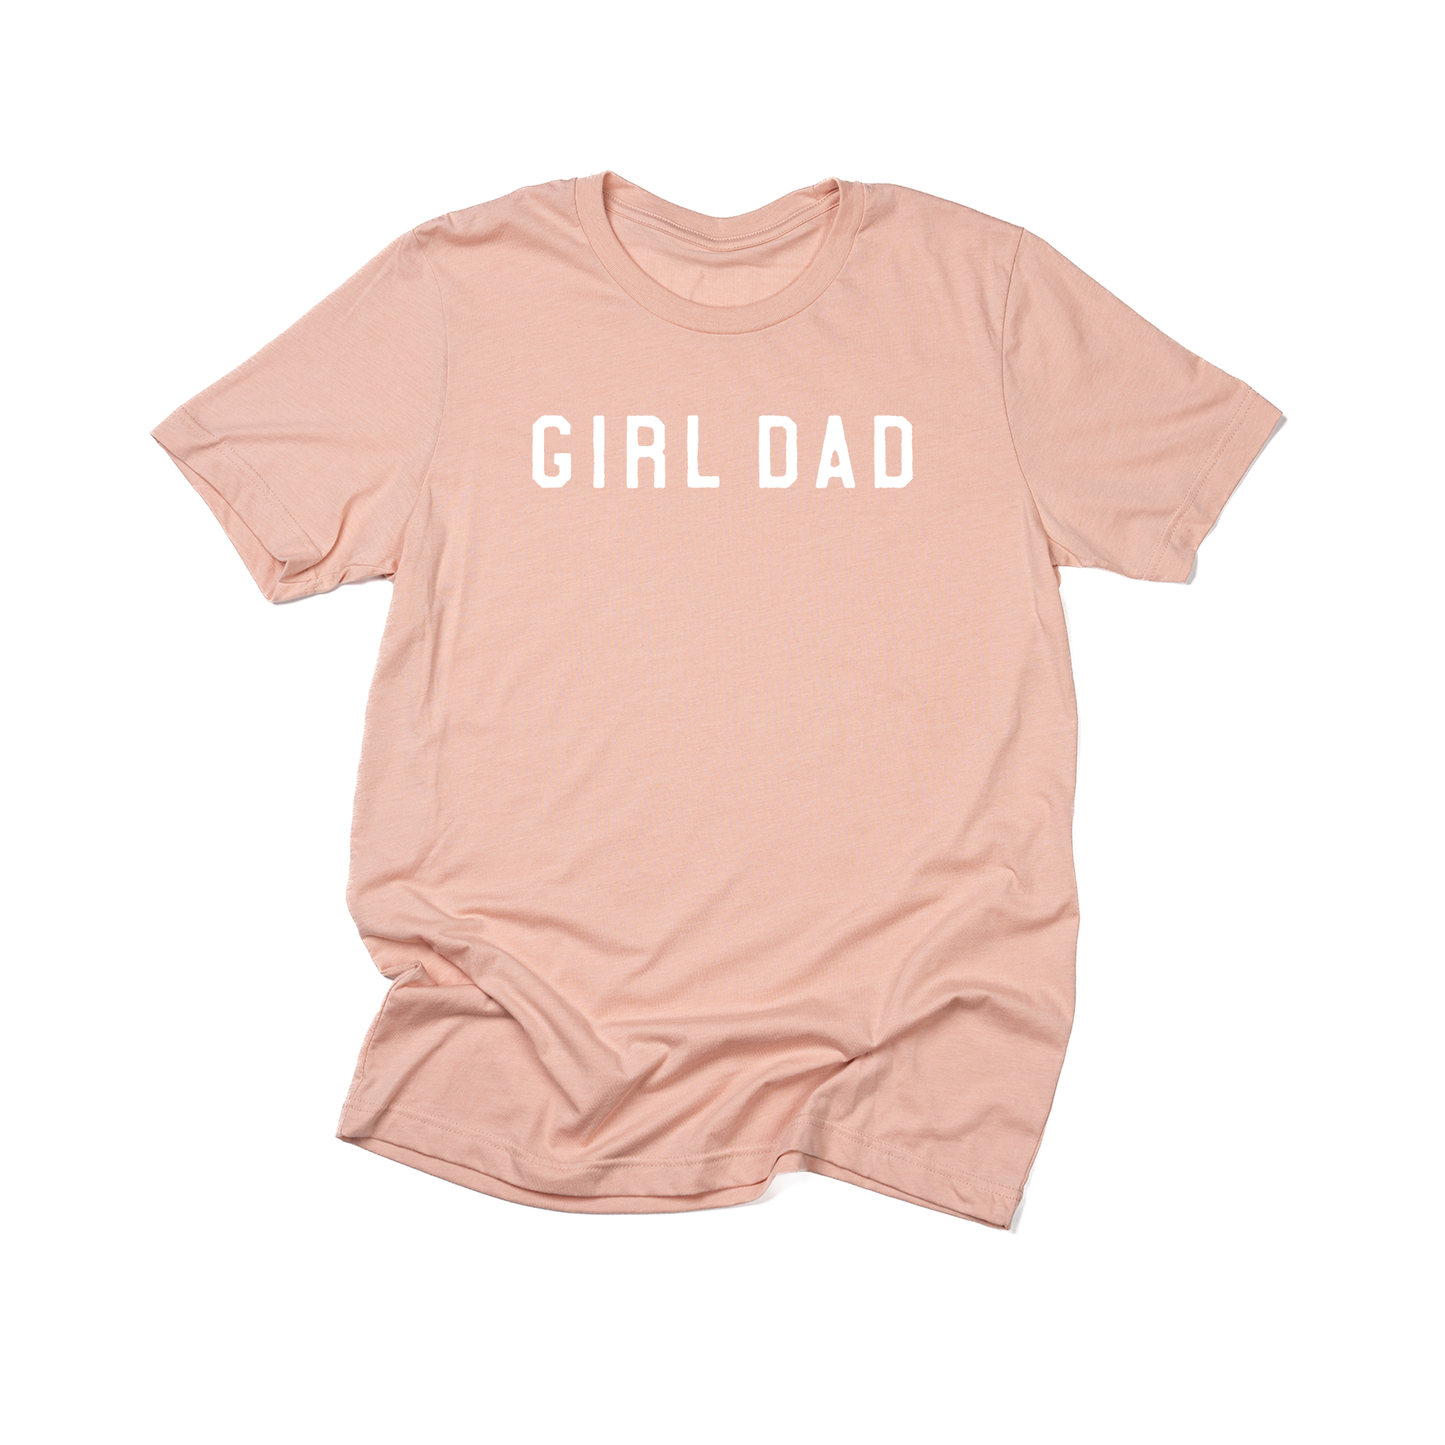 Girl Dad® (Across Front, White) - Tee (Peach)